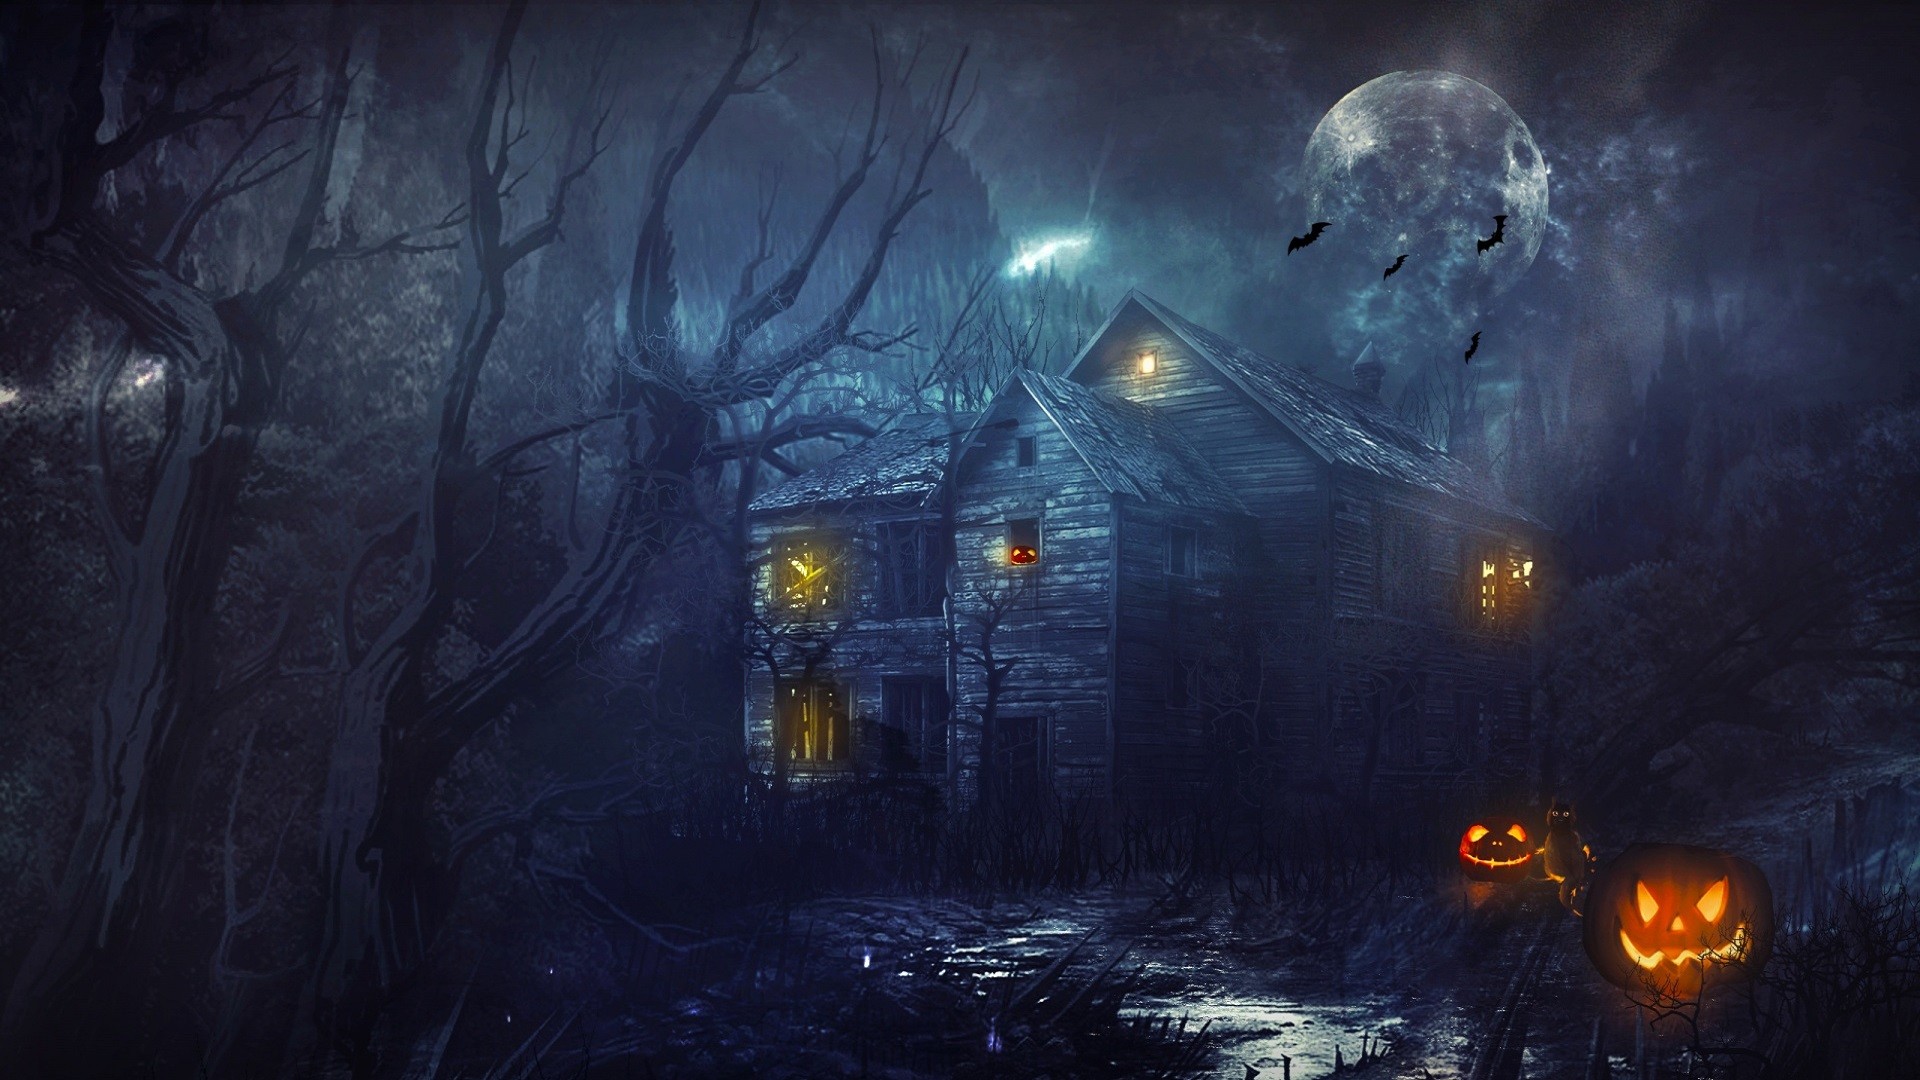 1920x1080 Halloween Background | Free Wallpapers | Pinterest | Halloween ... Halloween  Background Free Wallpapers Pinterest Halloween